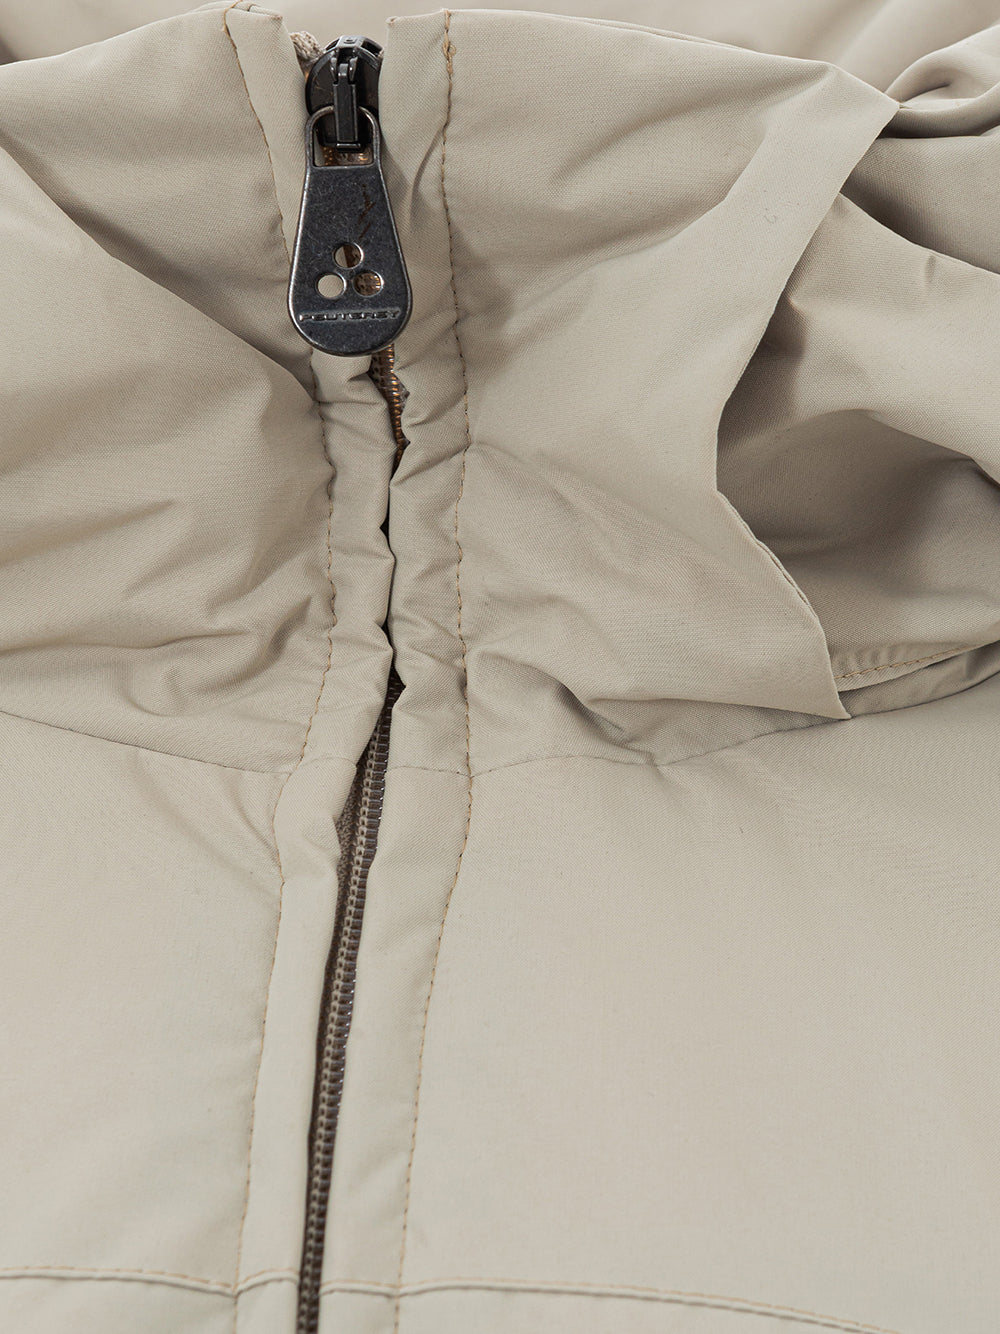 Peuterey Padded Jacket with Hood